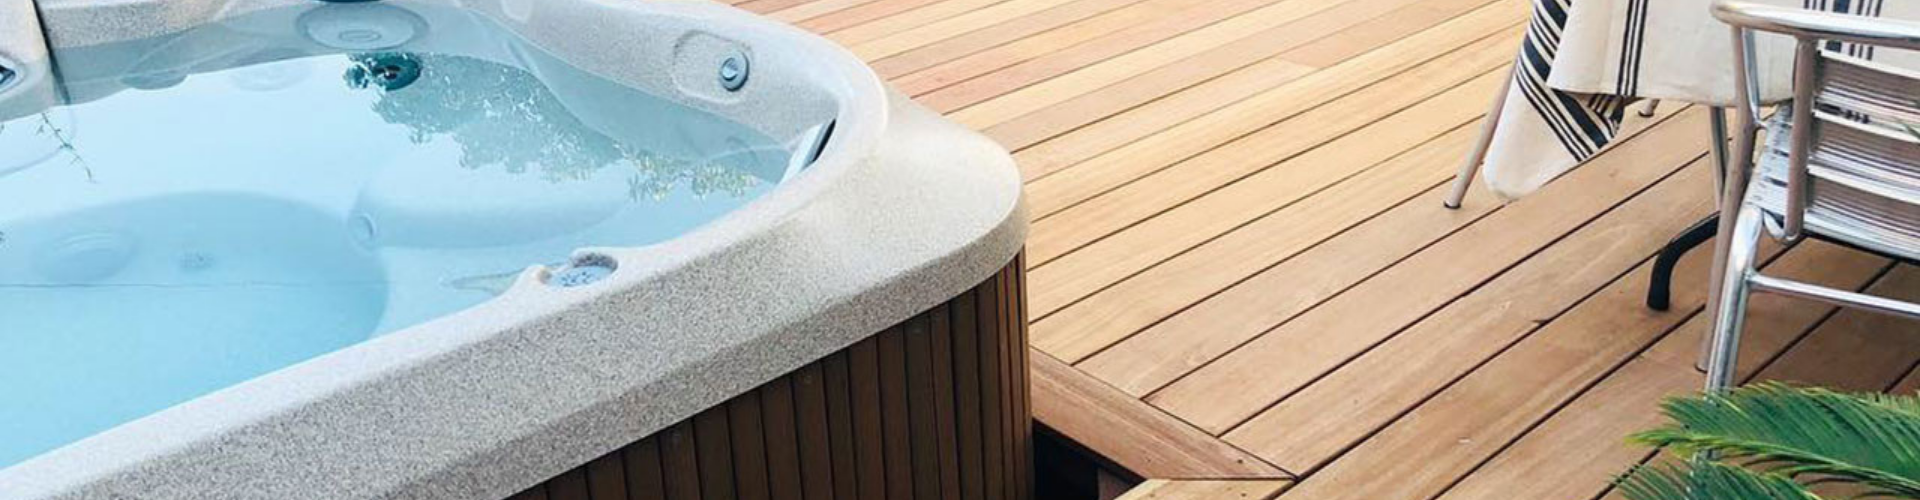 Can My Deck Support a Hot Tub?